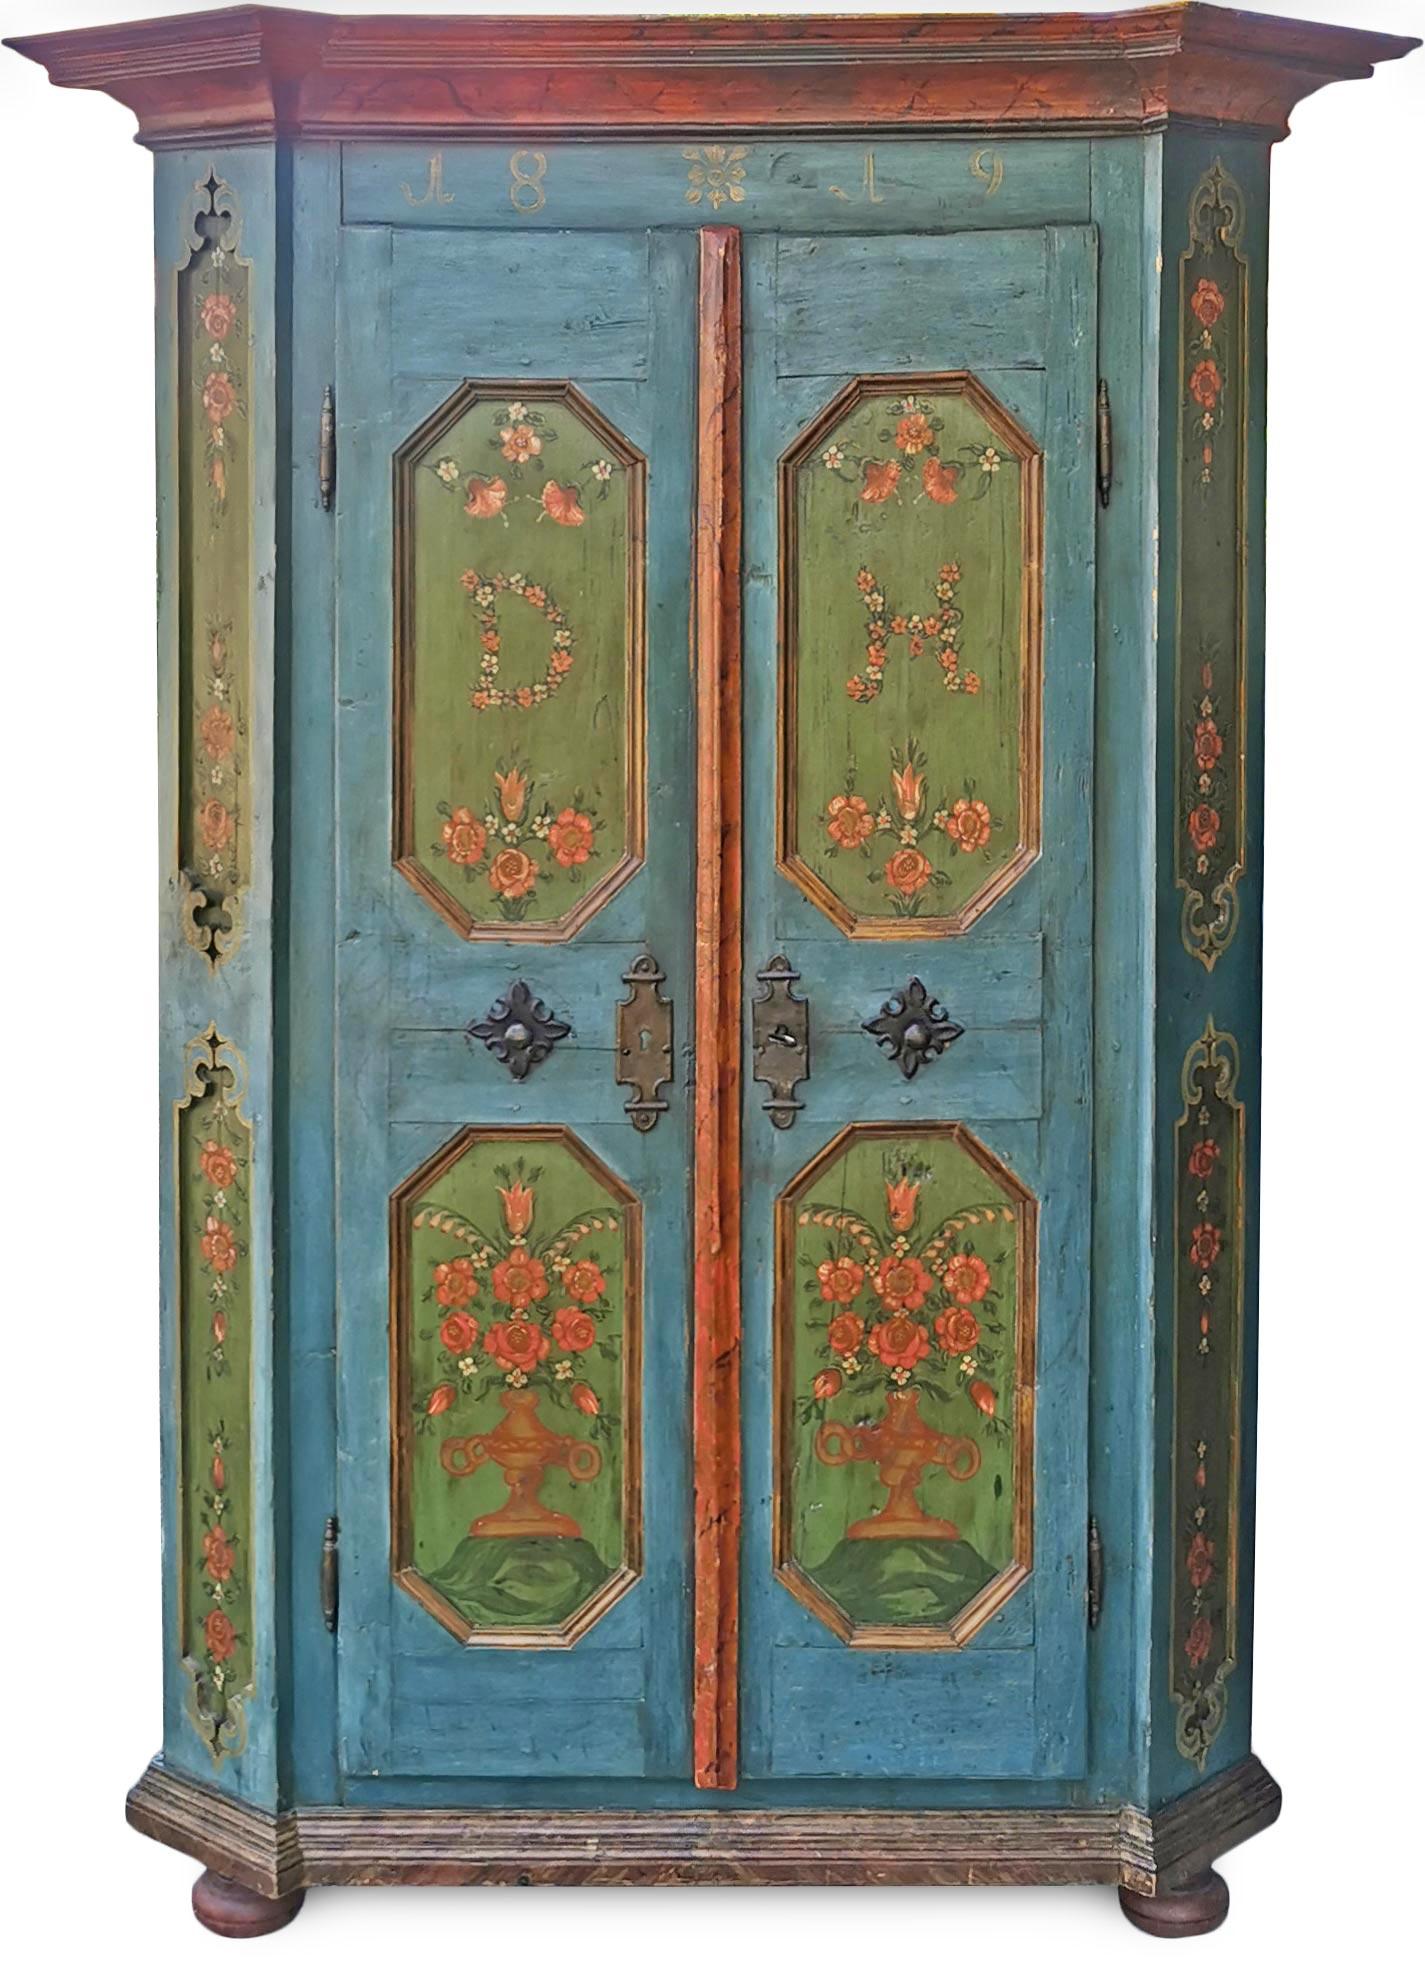 Tyrolean blue painted wardrobe dated 1819

Measures: H.190 cm - L.109 cm (146 to the frames) - P.42 cm (56 to the frames)

Beautiful painted wardrobe, with two doors, entirely painted in an intense blue color. On the doors four octagonal and framed